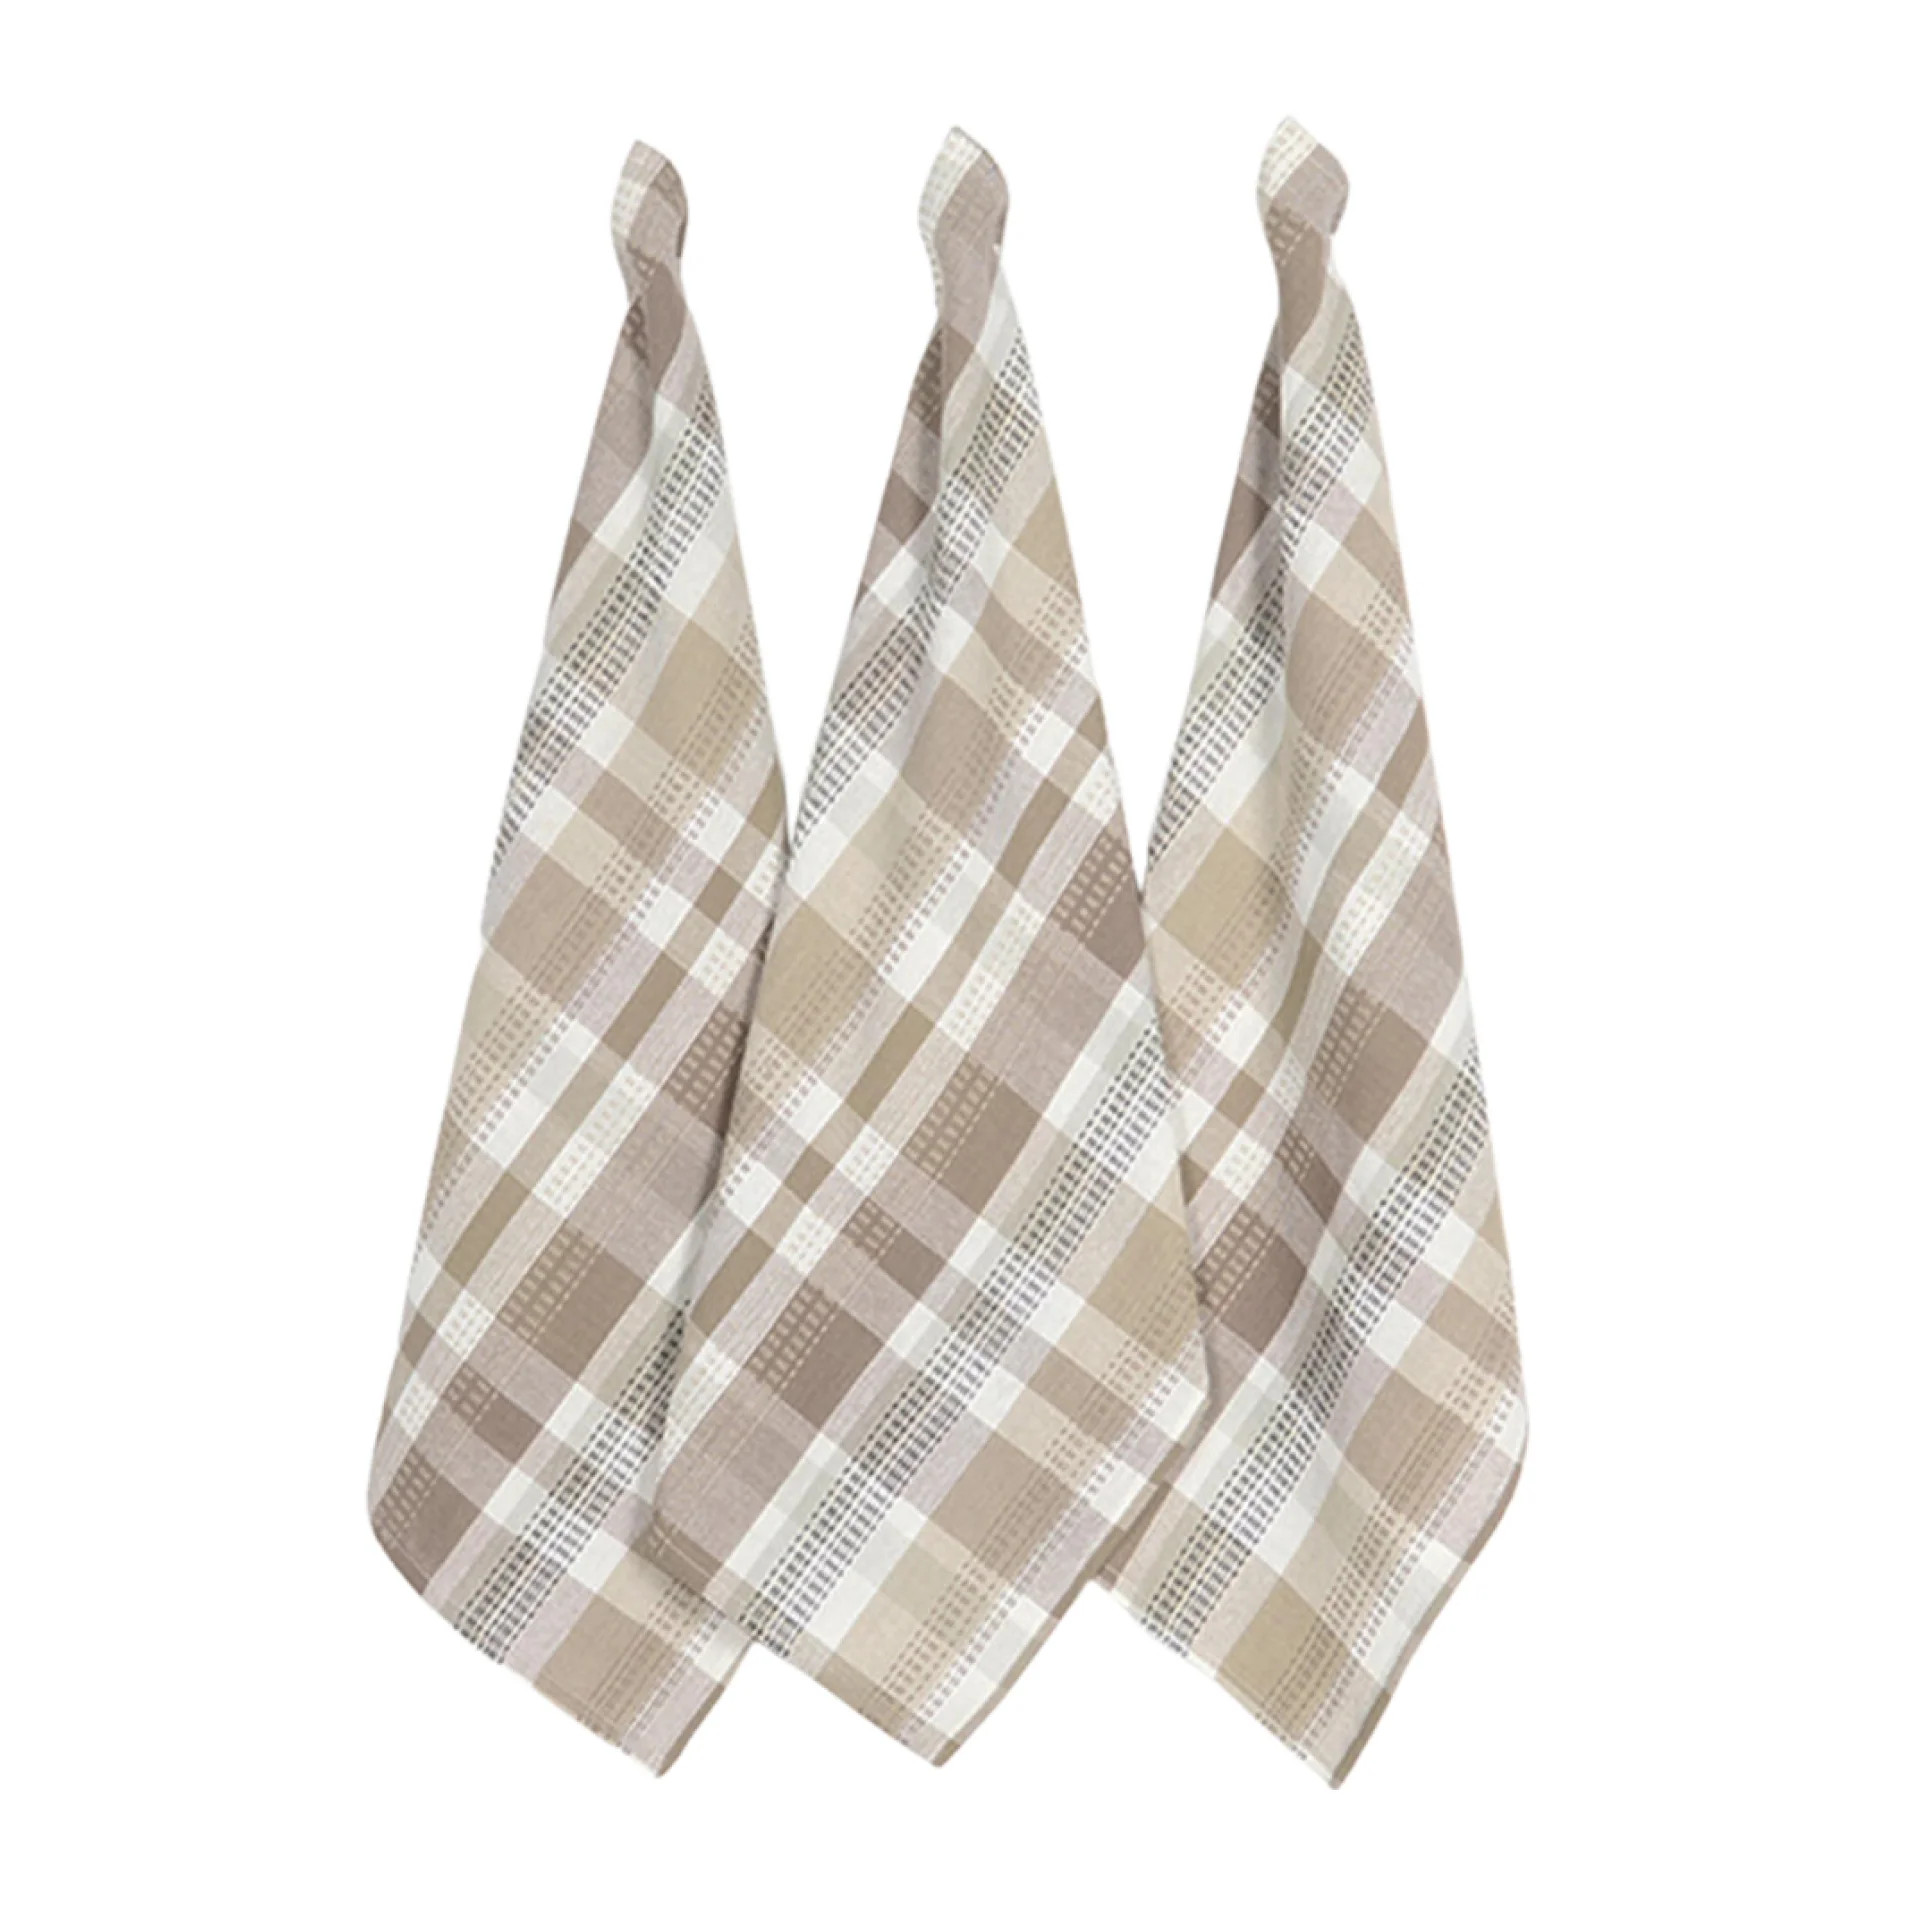 Natural Checkered Handloomed Kitchen Towels (set of 3) - Cove Home | Cove Home